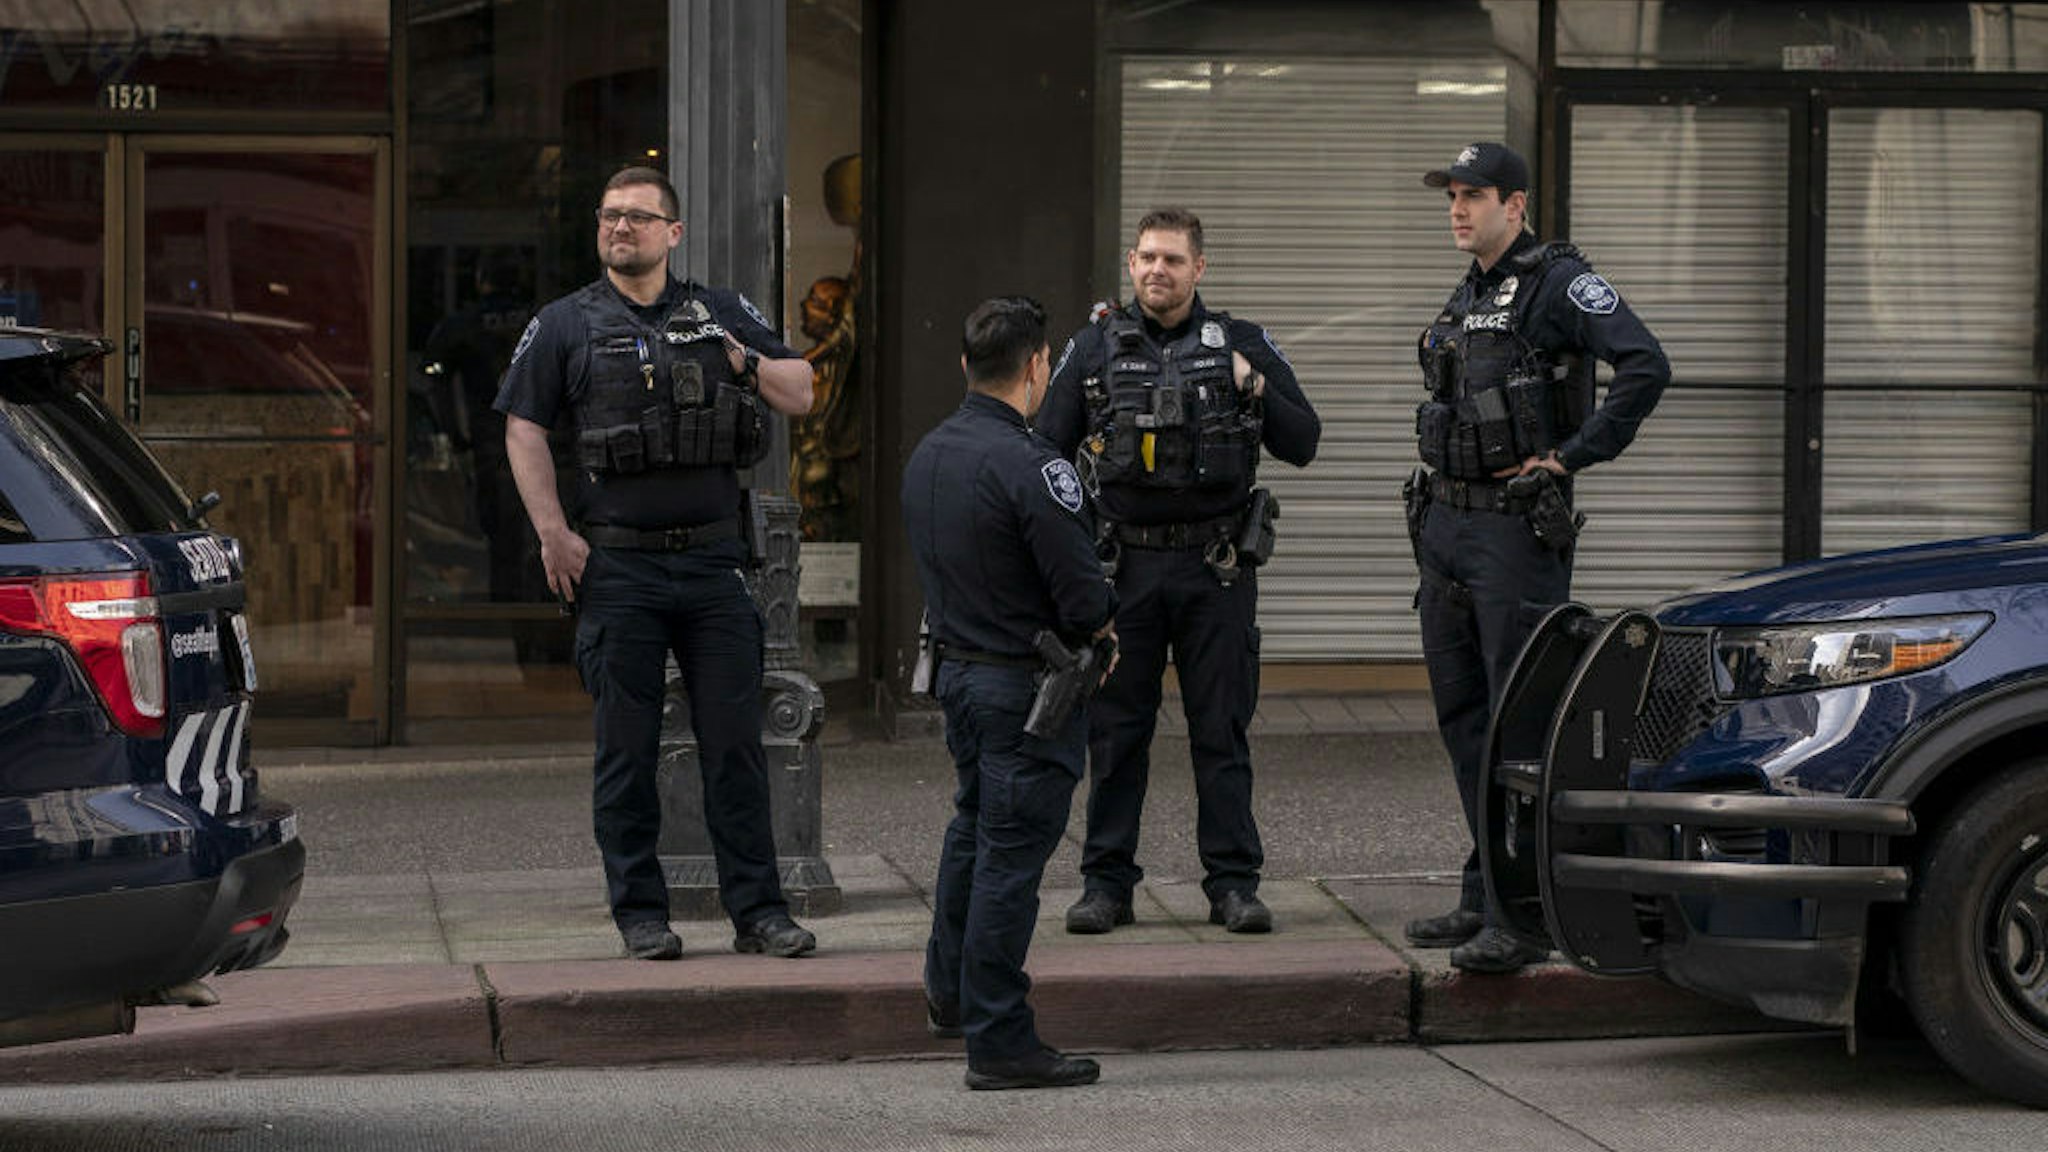 Seattle Police Department officers patrol near a mobile precinct location on Third Avenue in downtown Seattle, Washington, U.S., on Thursday, March 24, 2022. Amazon is temporarily shuttering an office in the area as police increase their presence downtown. Seattle's new mayor, Bruce Harrell, swept into office on a law-and-order platform that also pledged to stem rising homelessness, crime has instead worsened downtown and the area's post-Covid rebound is lagging behind other parts of the city. Photographer: David Ryder/Bloomberg via Getty Images